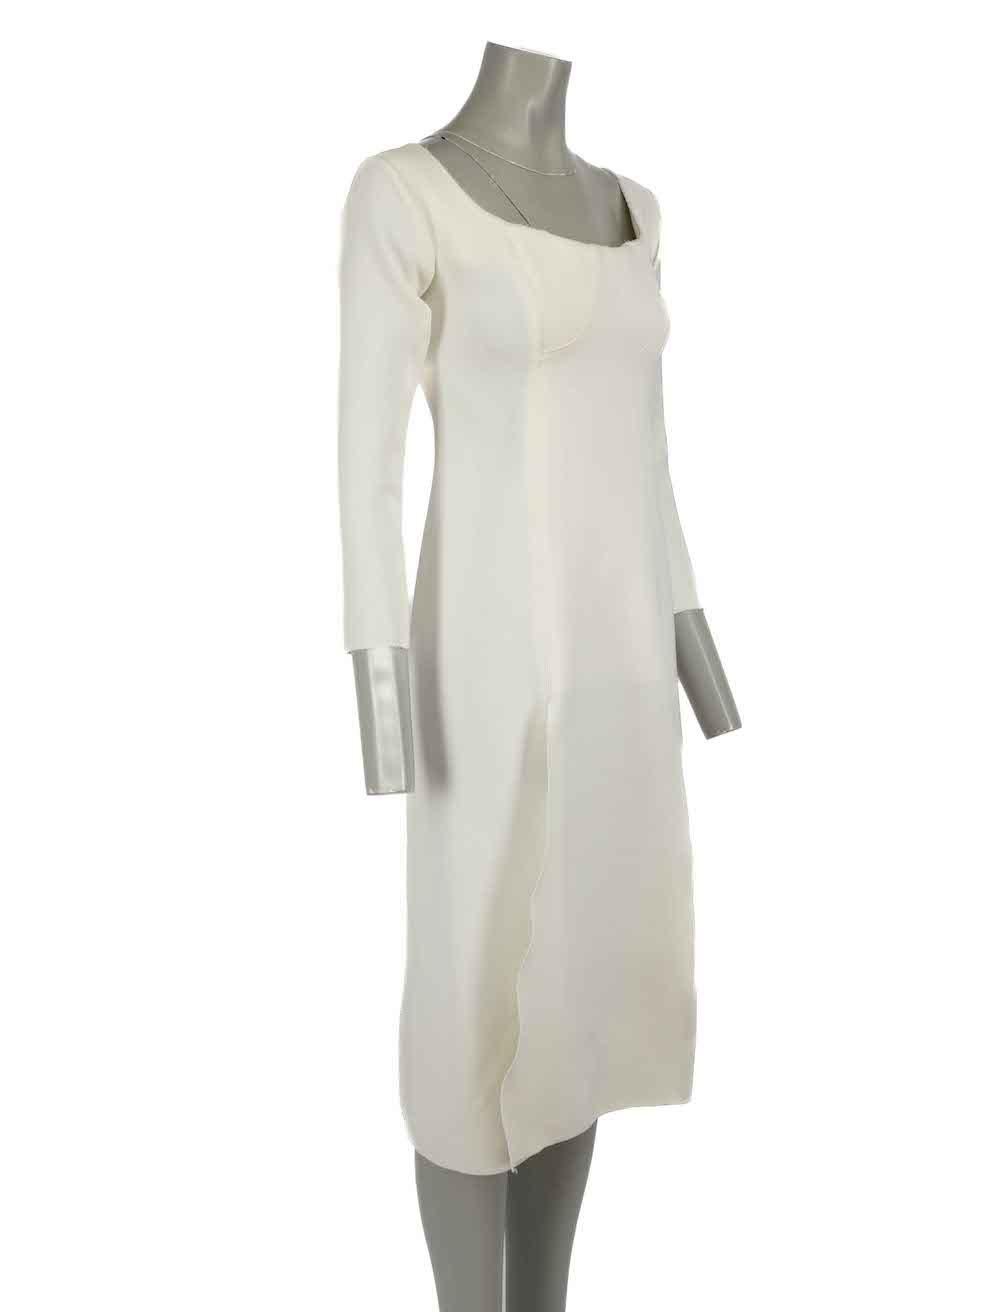 CONDITION is Very good. Hardly any visible wear to dress is evident on this used Christopher Esber designer resale item.
 
 Details
 White
 Viscose
 Dress
 Midi
 Front leg slits
 Round neck
 Long sleeves
 Raw hem detail
 Back zip fastening
 
 
 Made